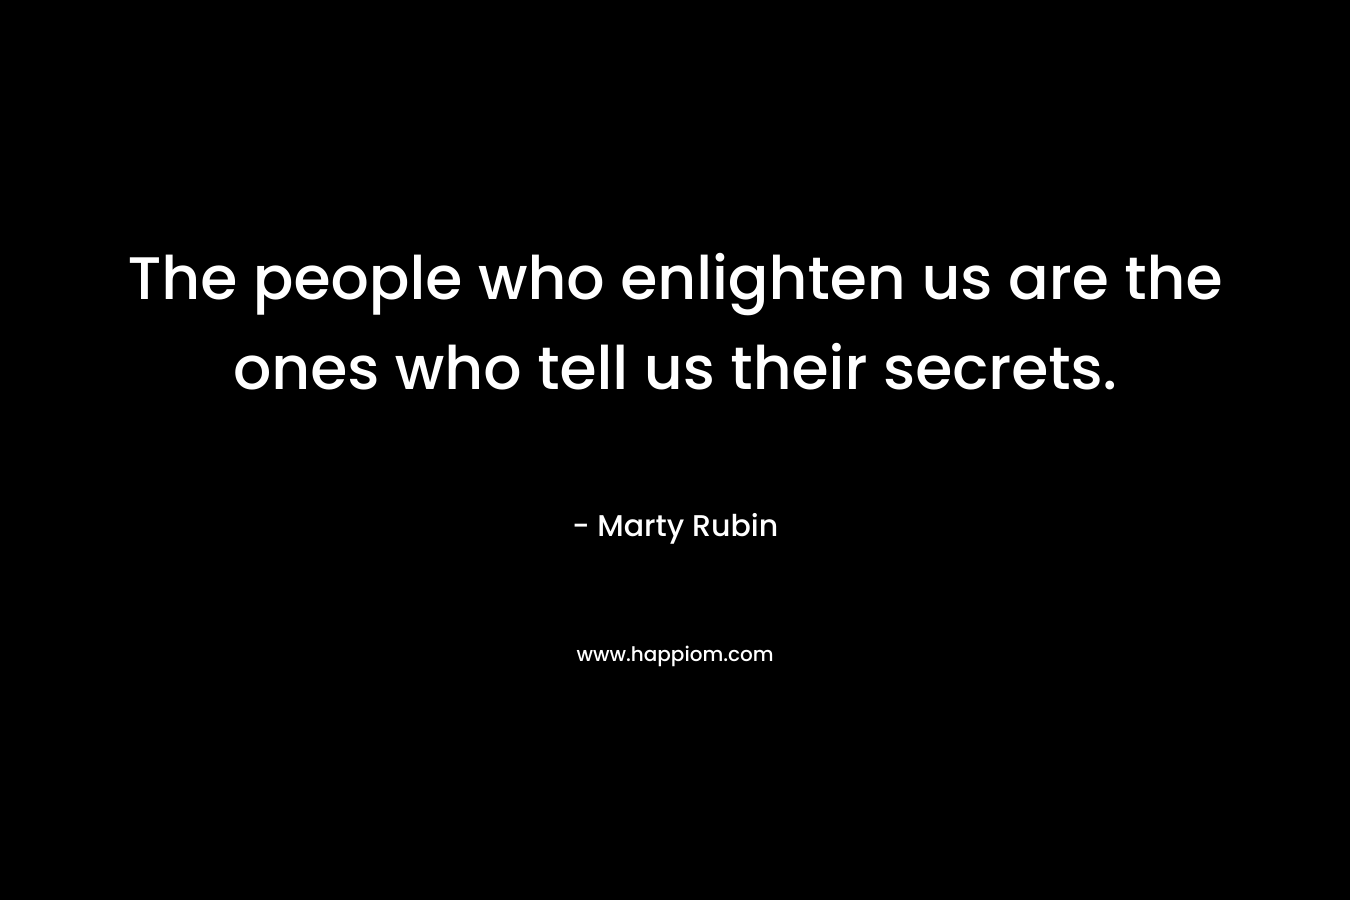 The people who enlighten us are the ones who tell us their secrets. – Marty Rubin